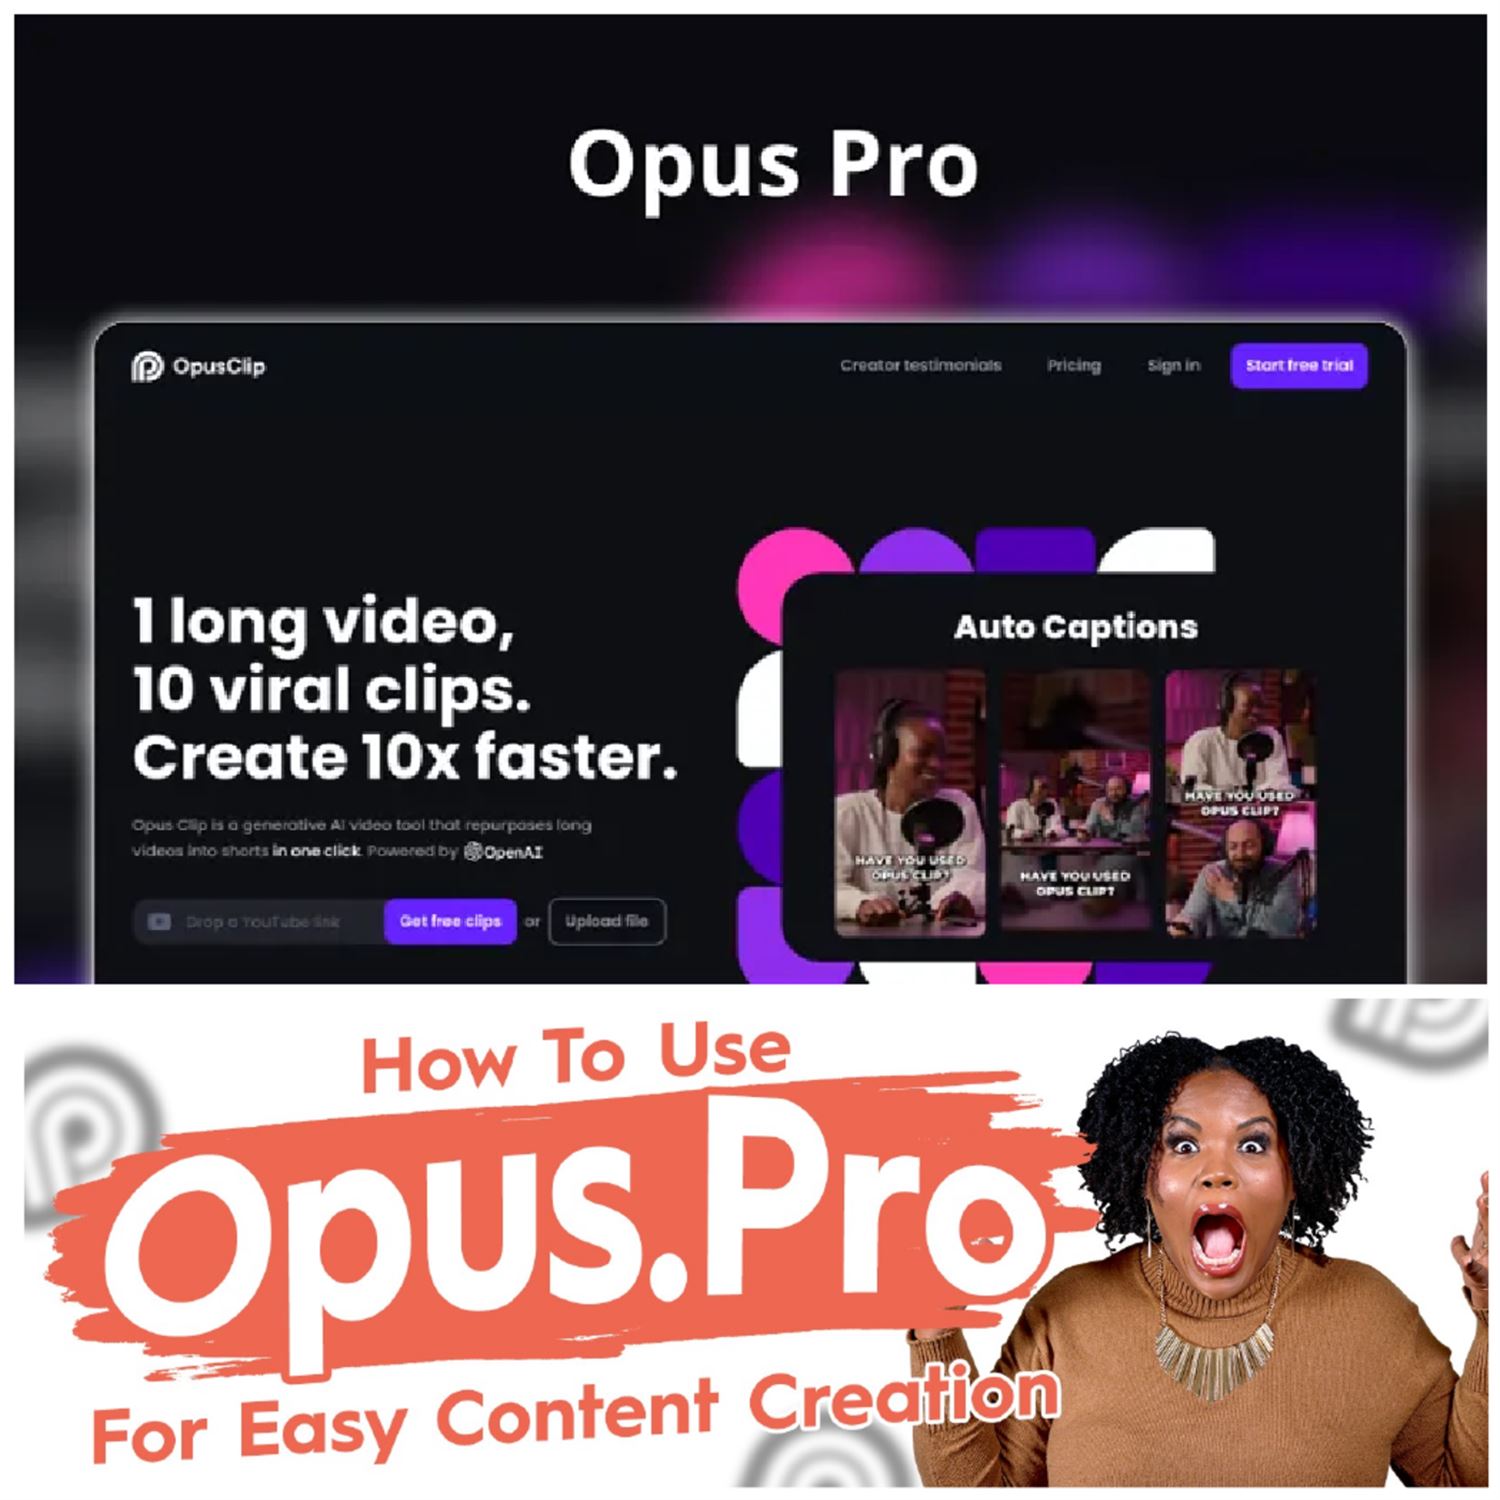 Opus Pro for clipping